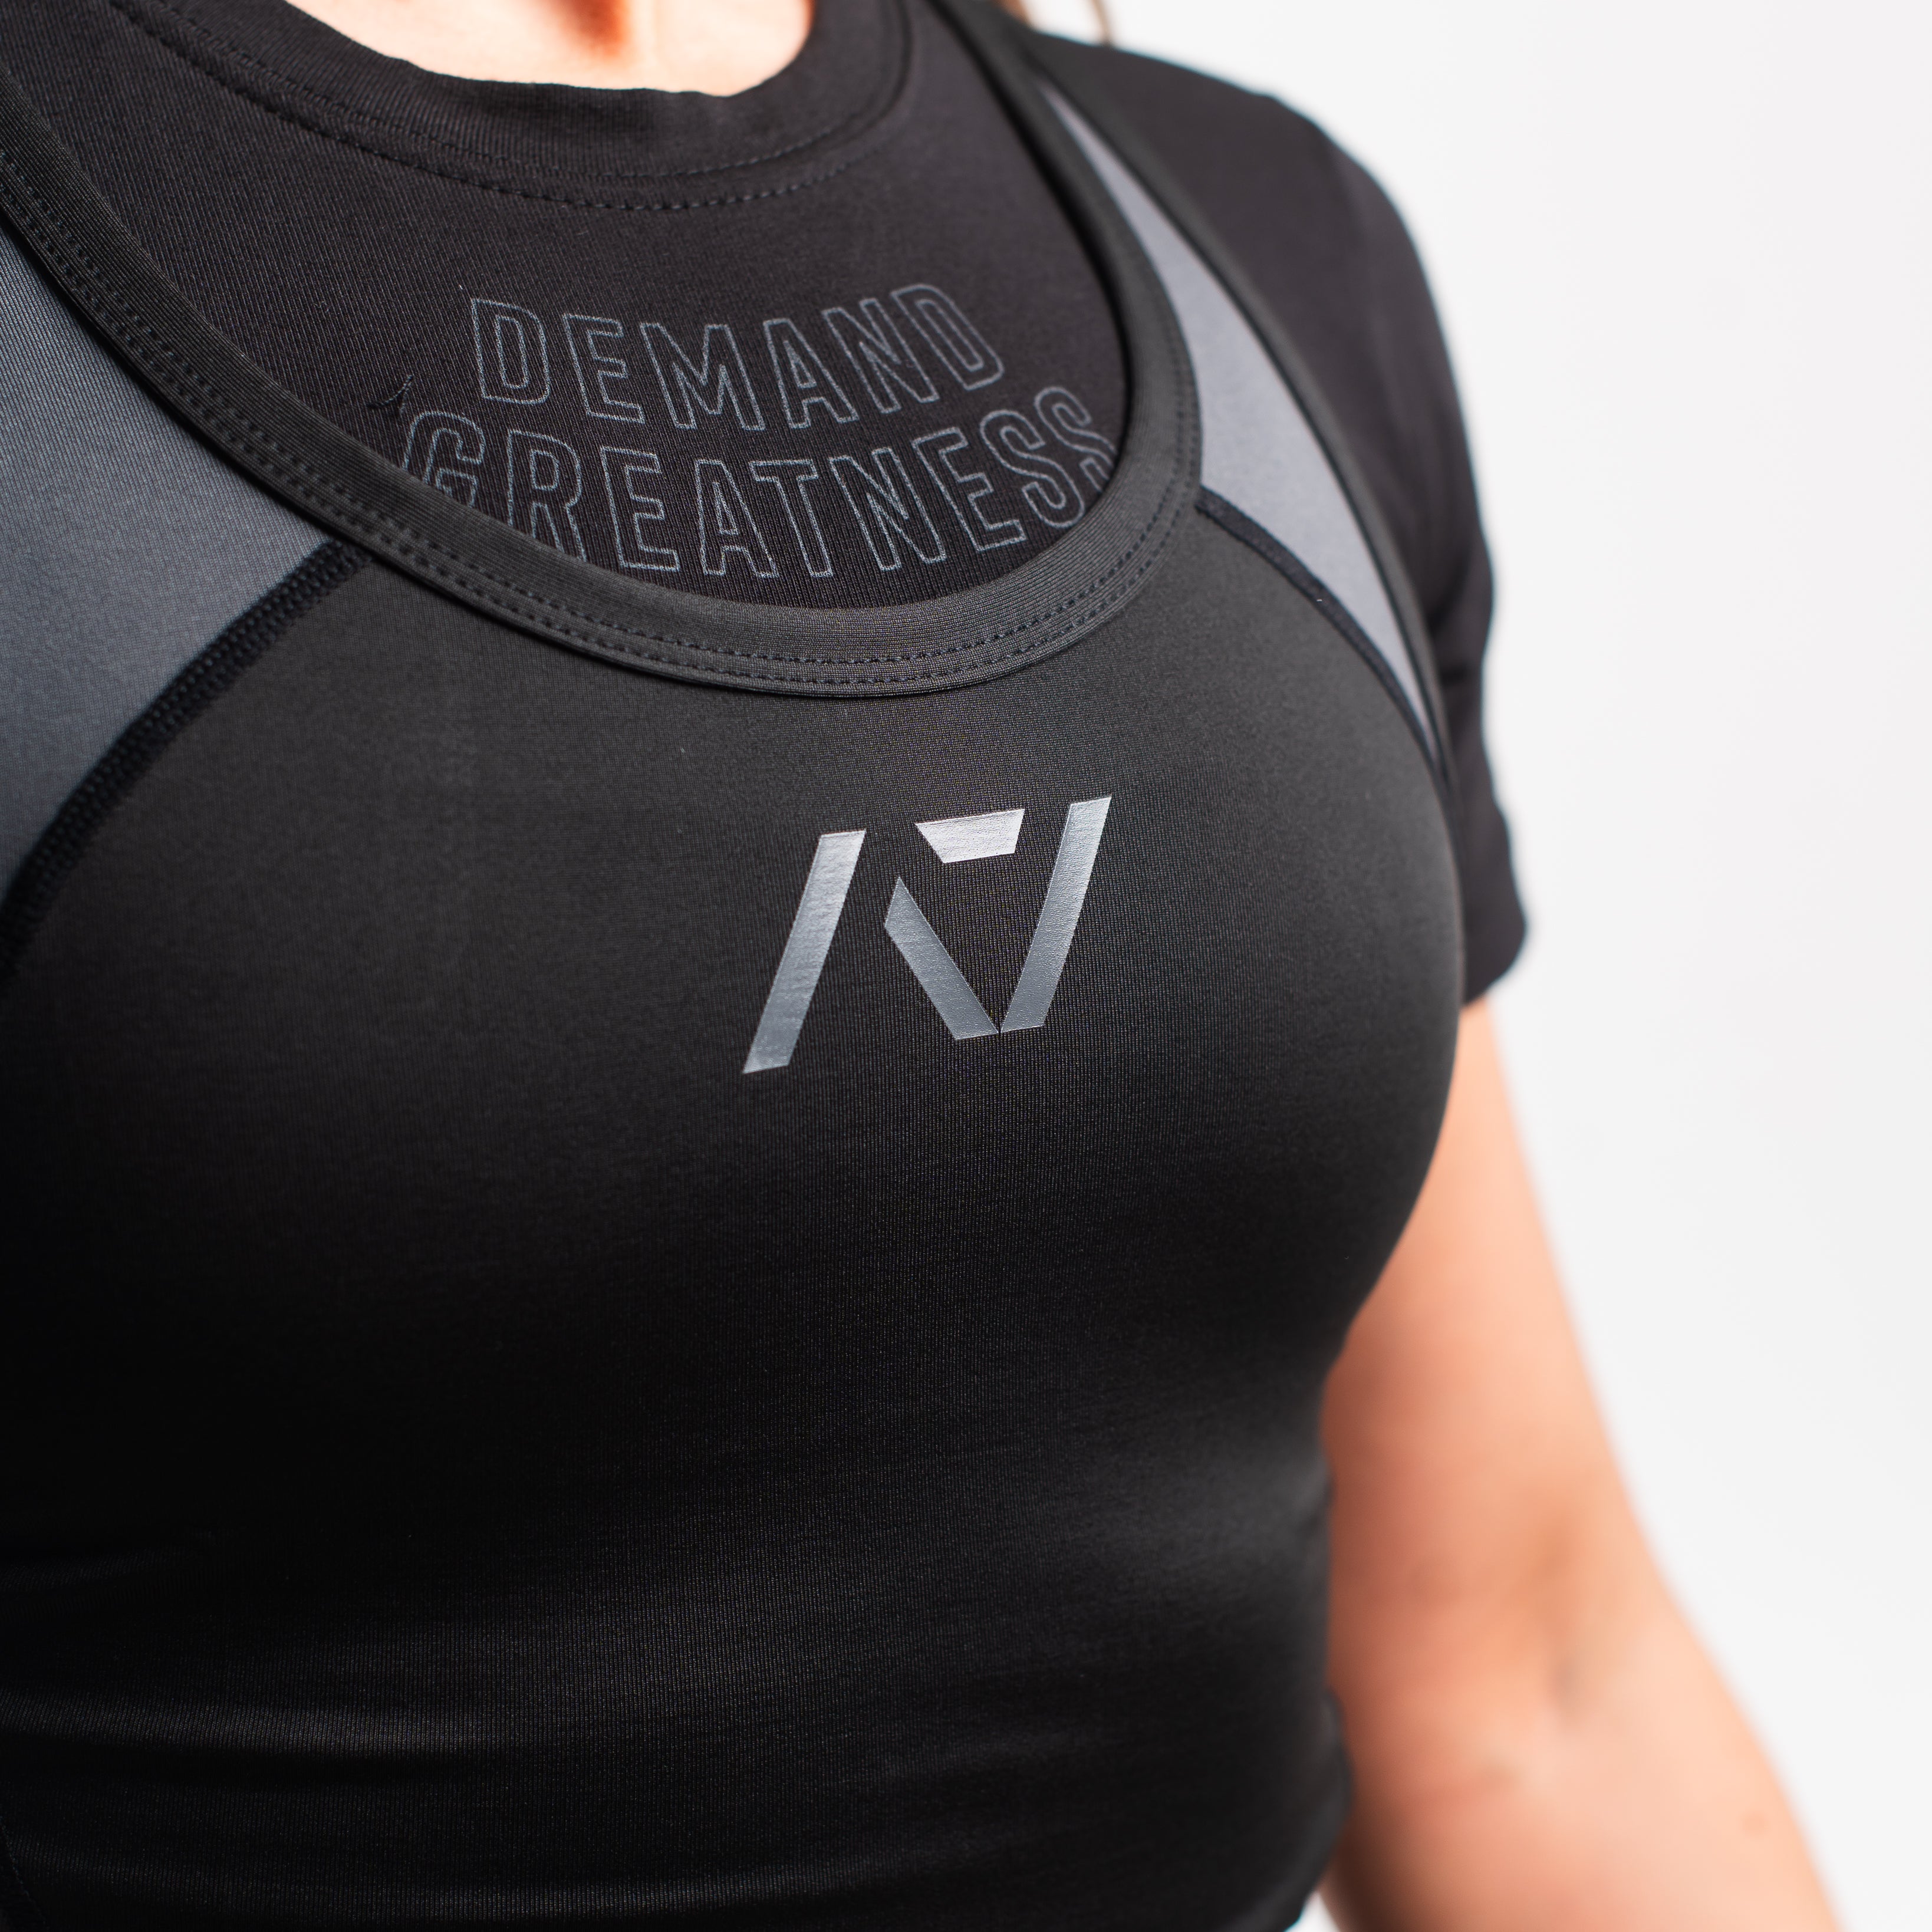 A7 IPF Approved Shadow Stone Luno singlet features extra lat mobility, side panel stitching to guide the squat depth level and curved panel design for a slimming look. The Women's cut singlet features a tapered waist and additional quad room. The IPF Approved Kit includes Luno Powerlifting Singlet, A7 Meet Shirt, A7 Zebra Wrist Wraps, A7 Deadlift Socks, Hourglass Knee Sleeves (Stiff Knee Sleeves and Rigor Mortis Knee Sleeves). All A7 Powerlifting Equipment shipping to UK, Norway, Switzerland and Iceland.